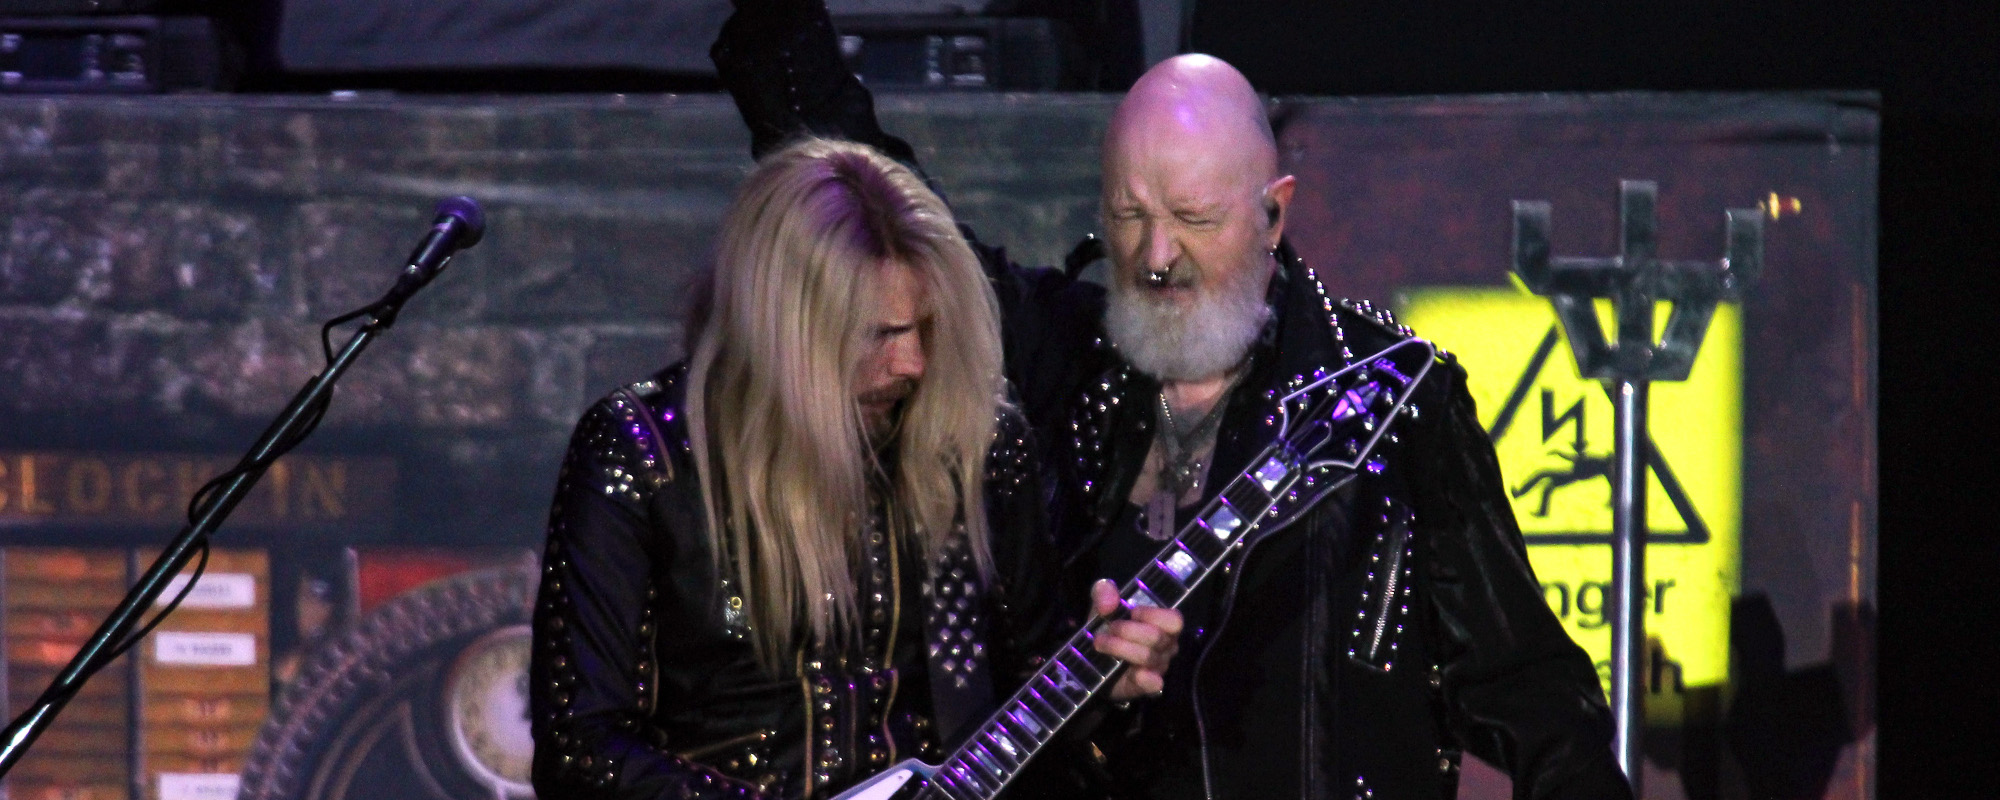 Judas Priest Sells First Two Albums to Music Publisher